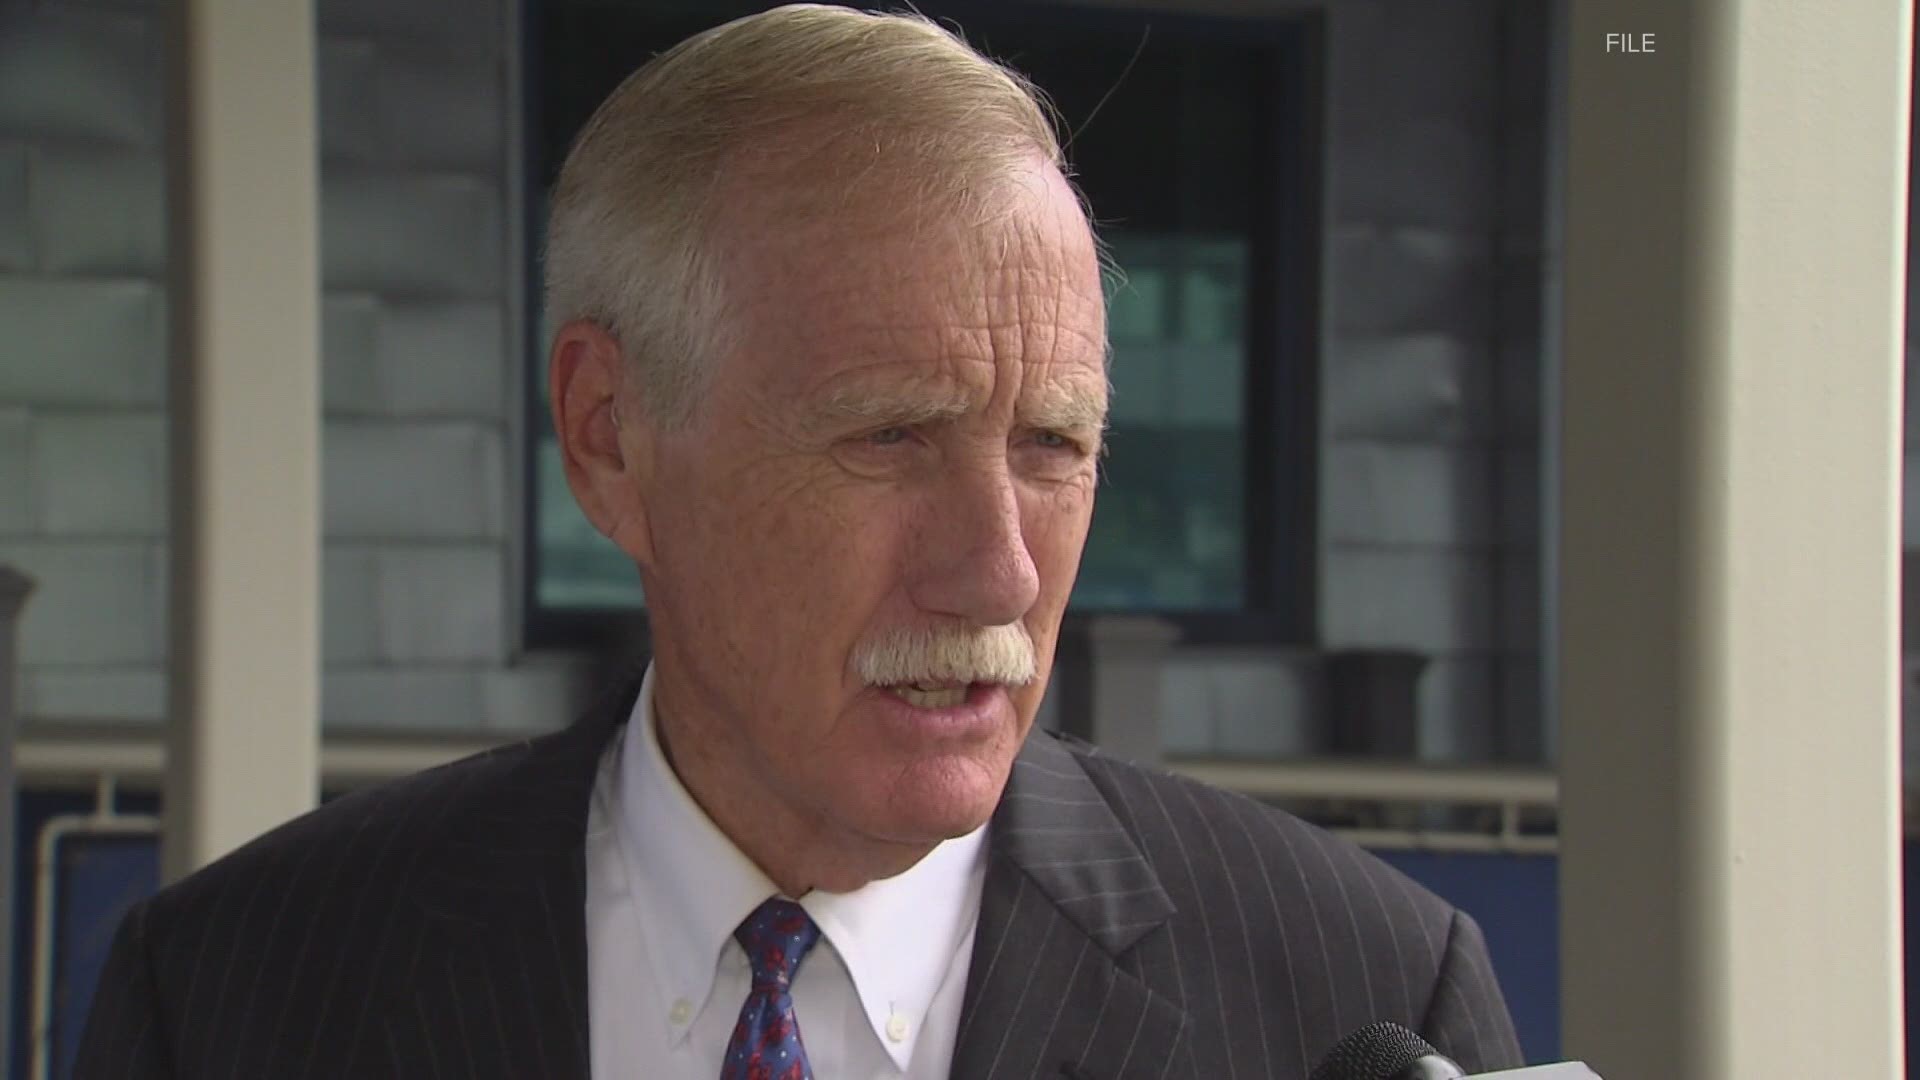 Senator Angus King will have a say in what's happening in Acadia now that he's chairing the subcommittee on National Parks.